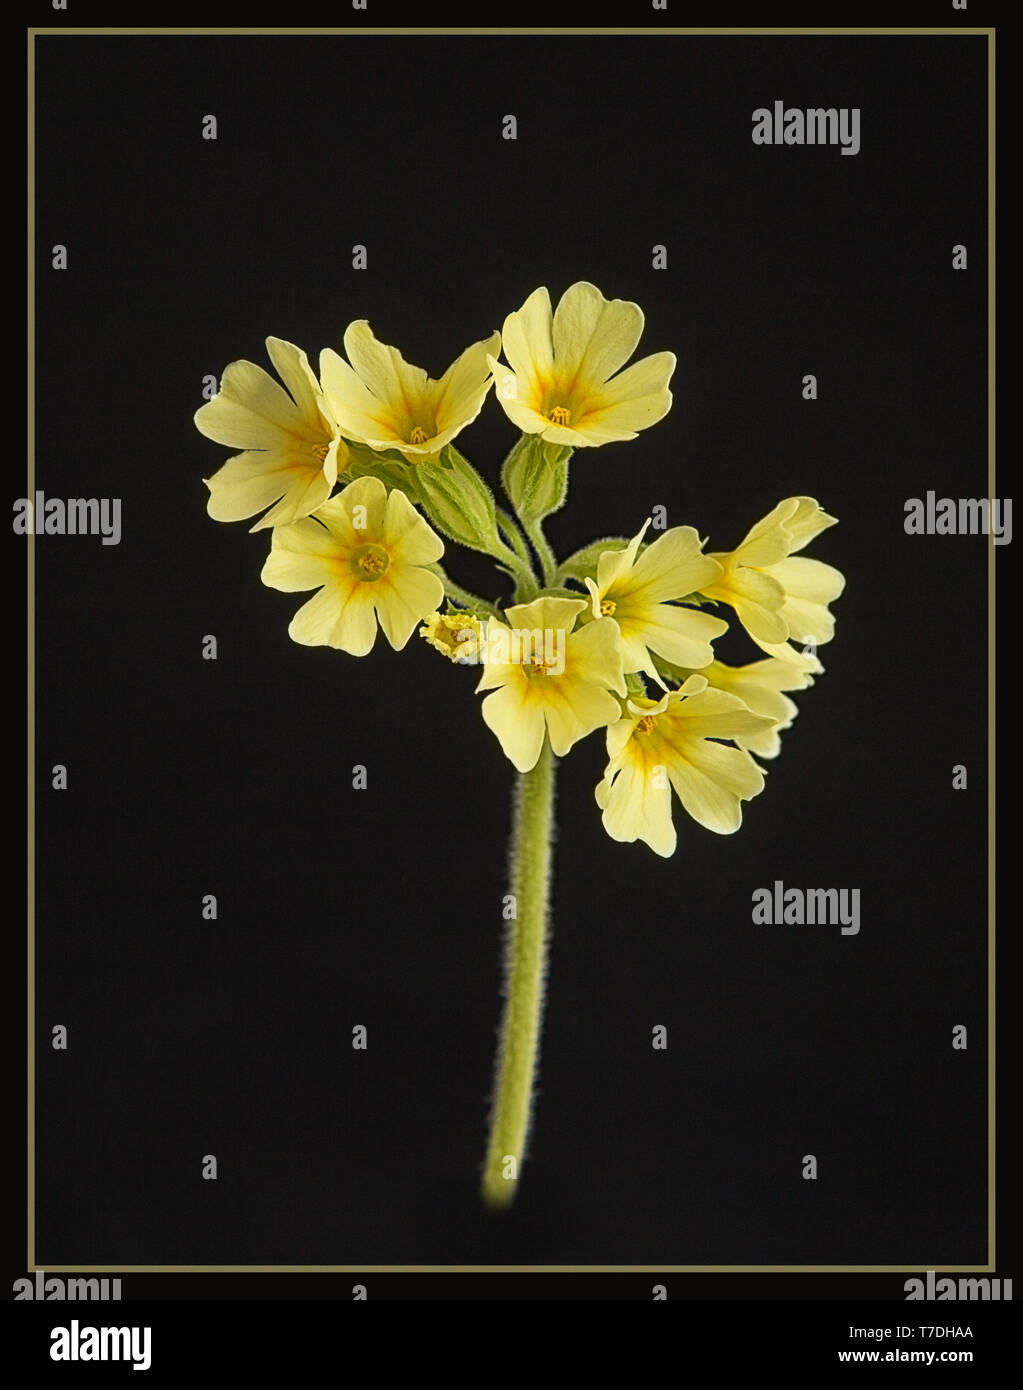 Cowslip flowers set against a black background. Stock Photo